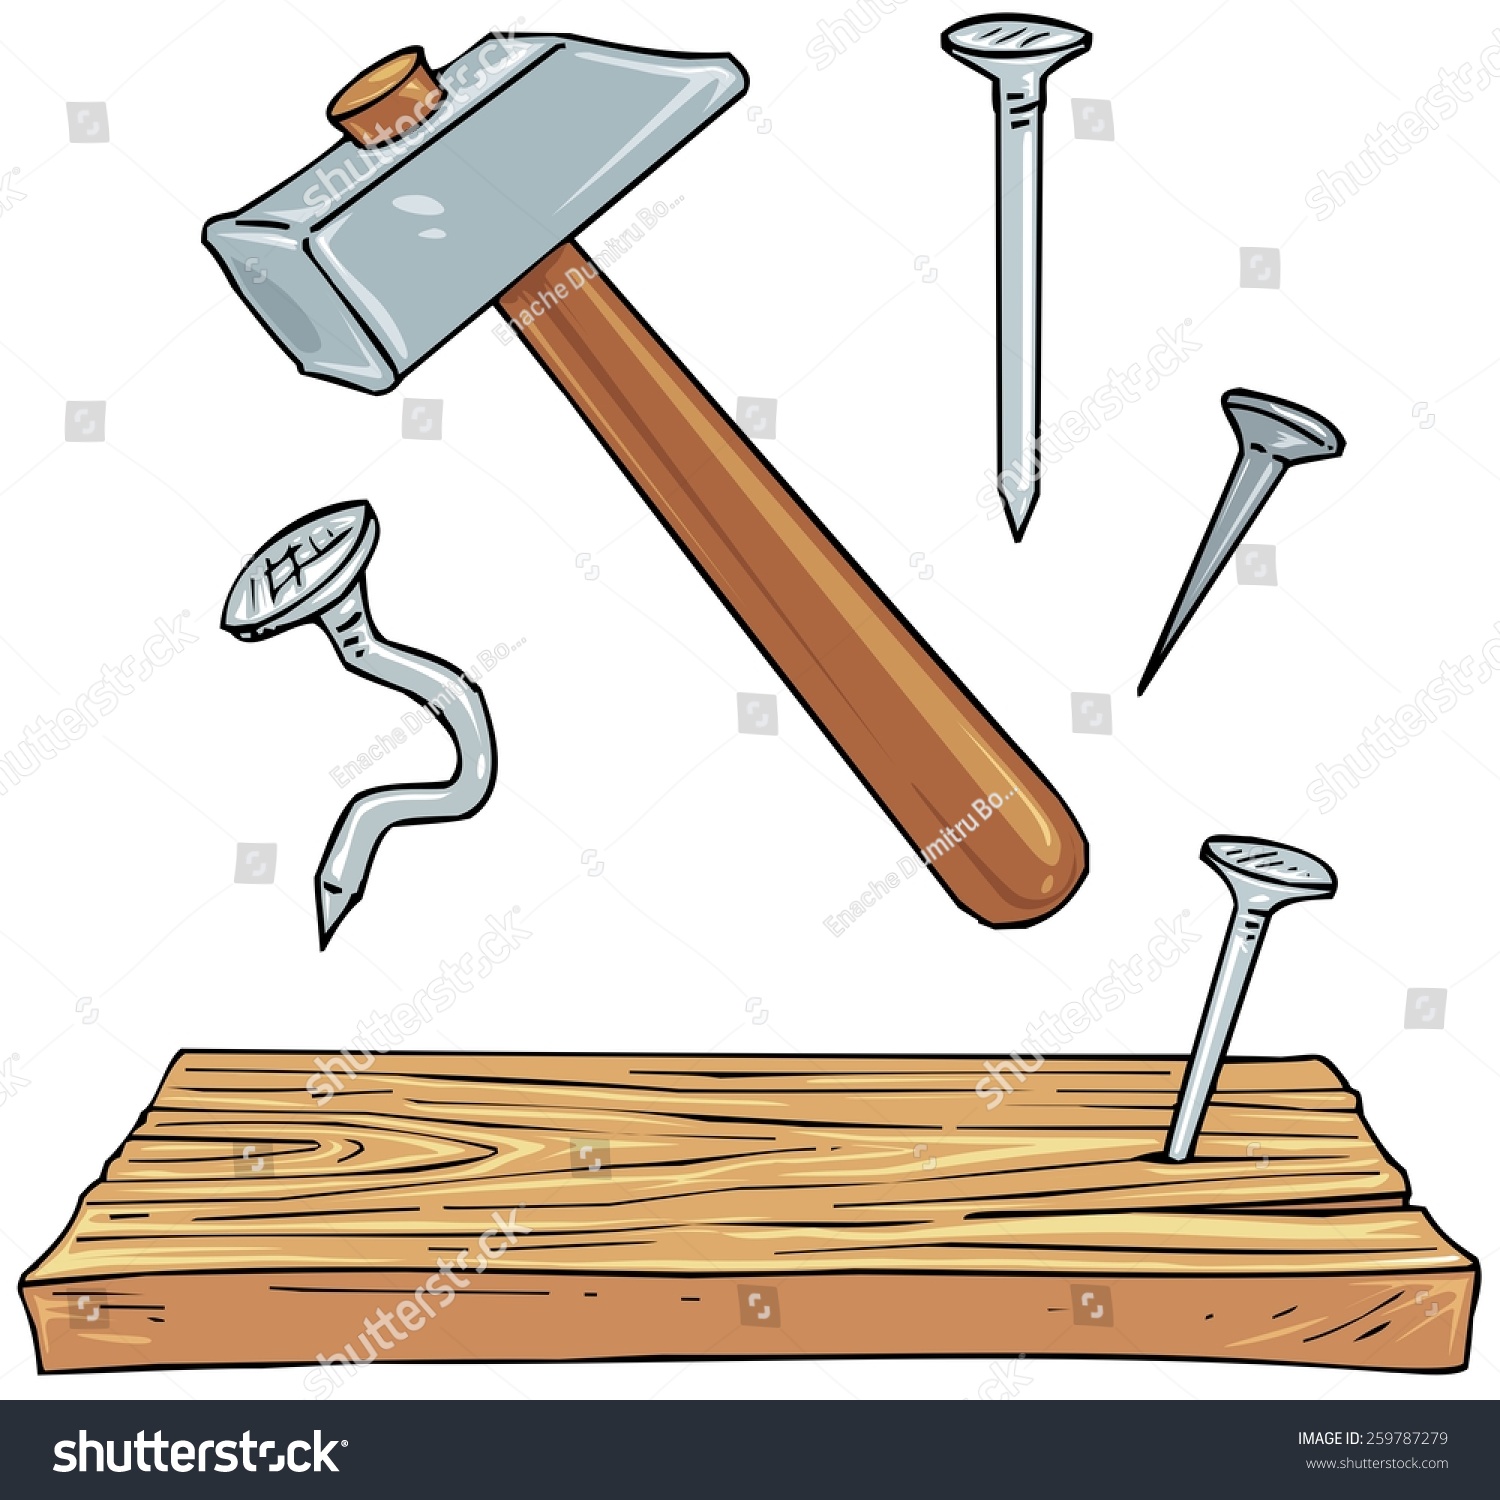 hammer and nails clipart - photo #36